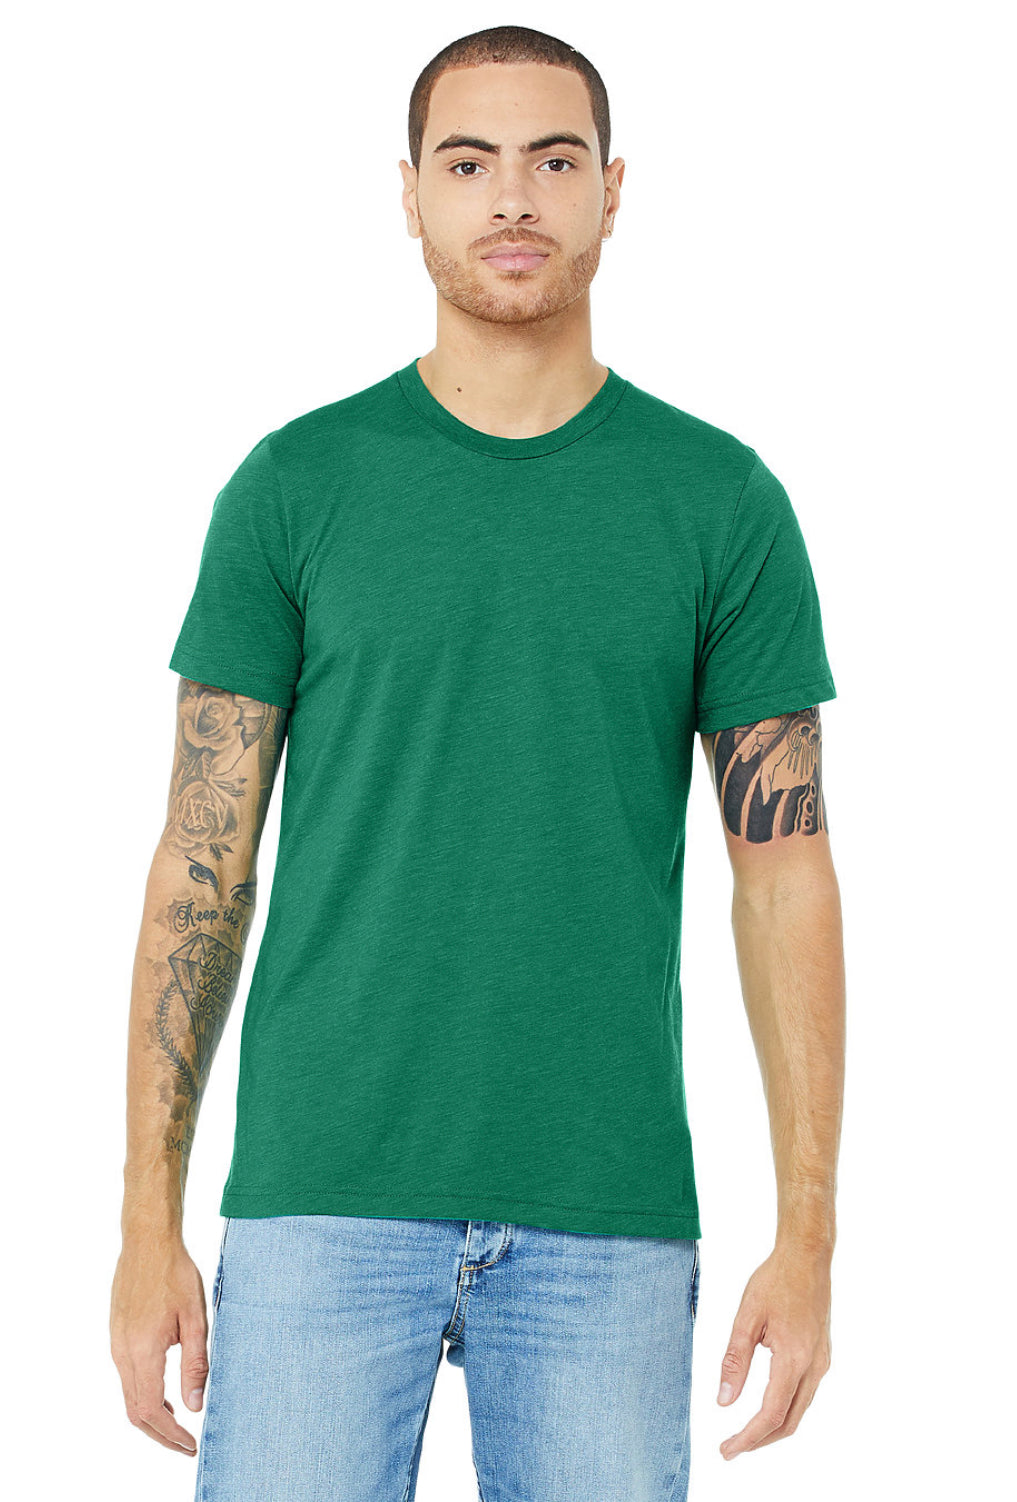 Pacific fly-chic21 Green Bella+Canvas Tee, – -